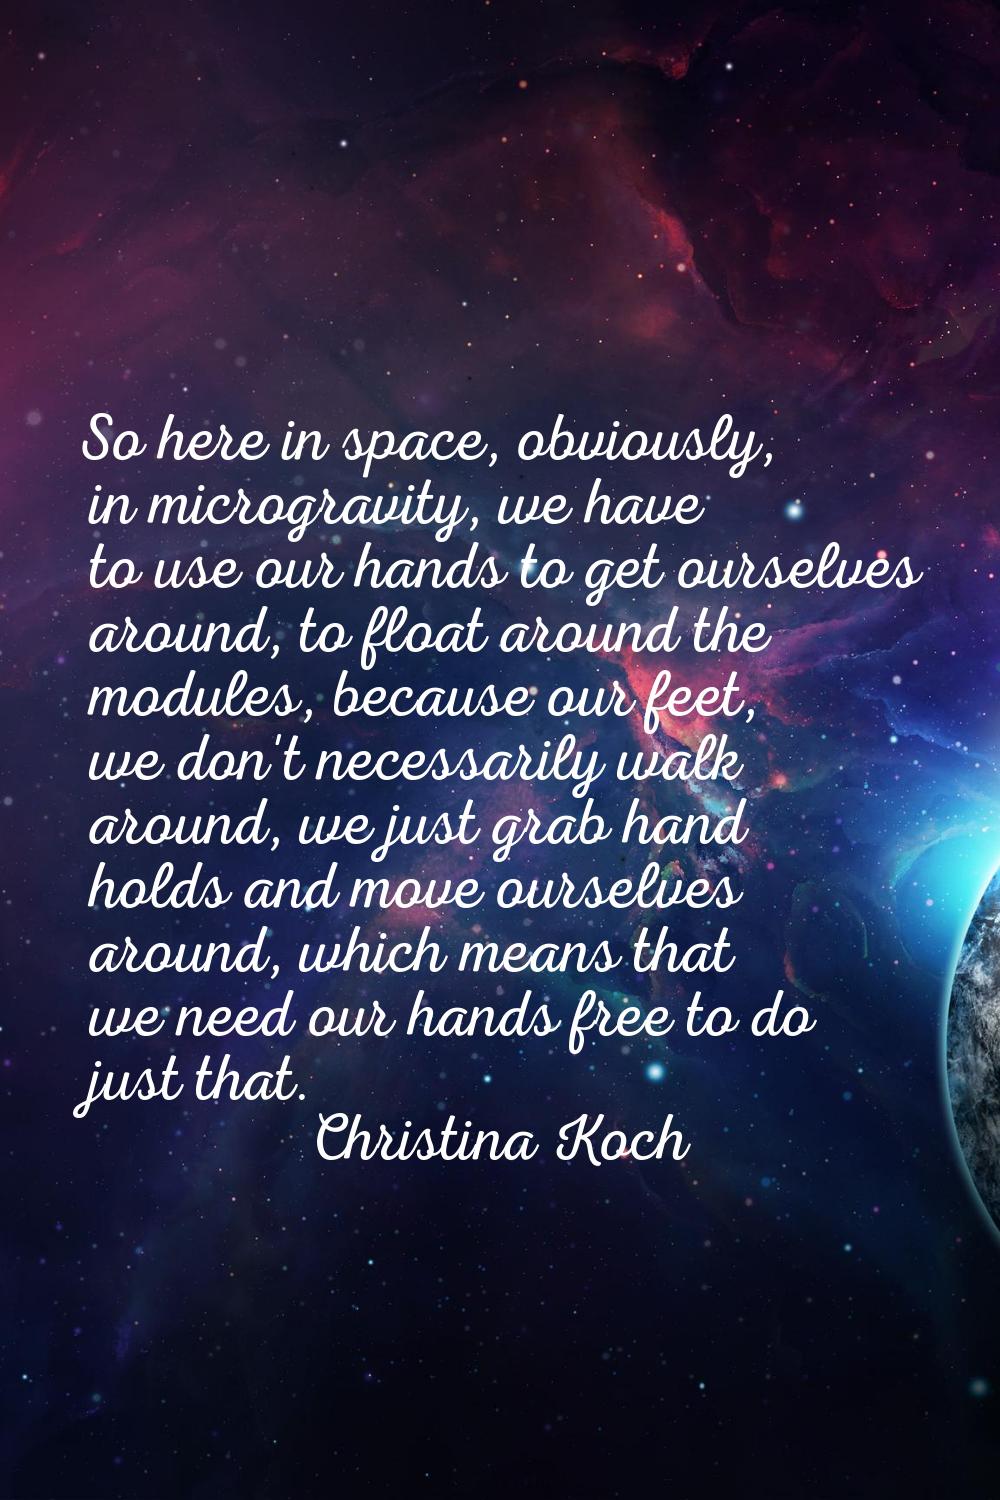 So here in space, obviously, in microgravity, we have to use our hands to get ourselves around, to 